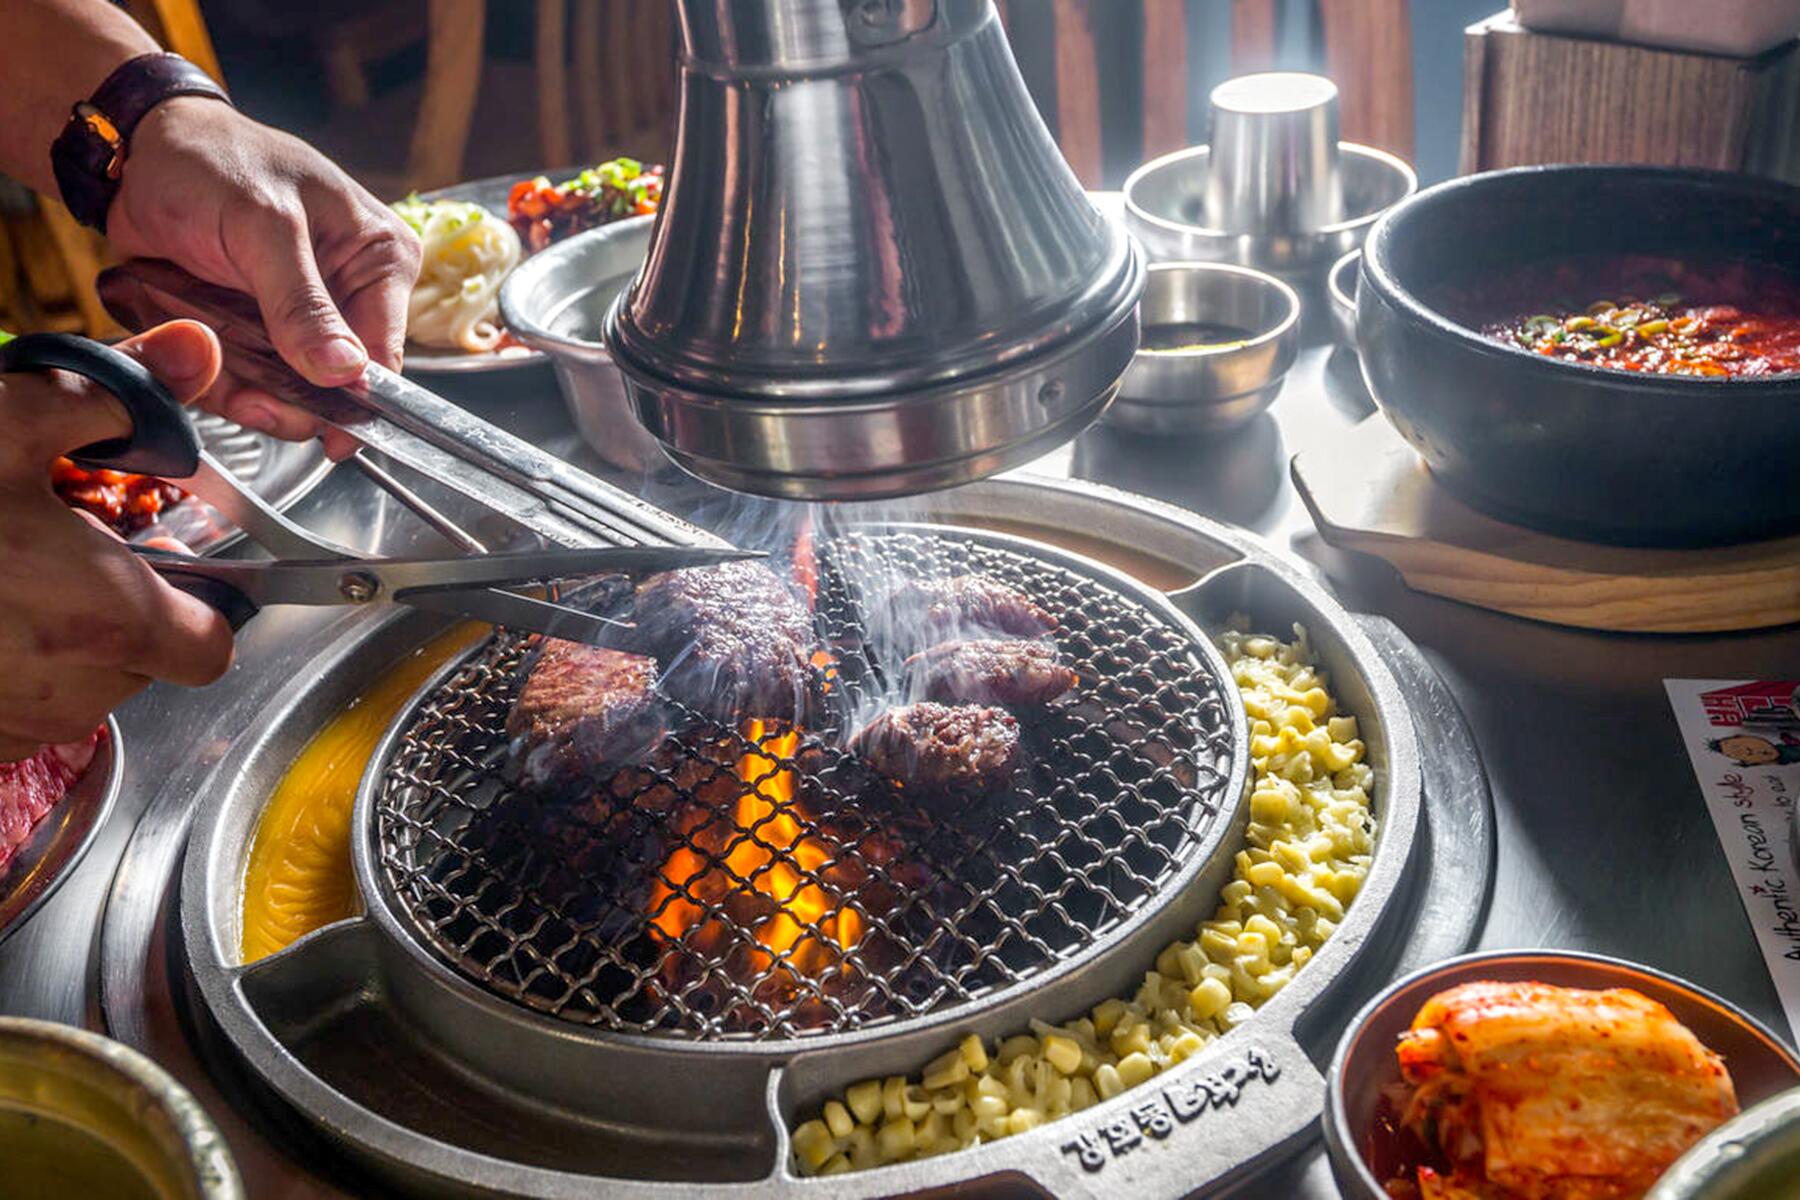 <a href='https://www.fodors.com/world/north-america/usa/new-york/new-york-city/experiences/news/photos/best-korean-barbecue-restaurants-in-new-york-city#'>From &quot;The 7 Best Korean Barbecue Restaurants in New York City: Kang Ho Dong Baekjeong NYC&quot;</a>